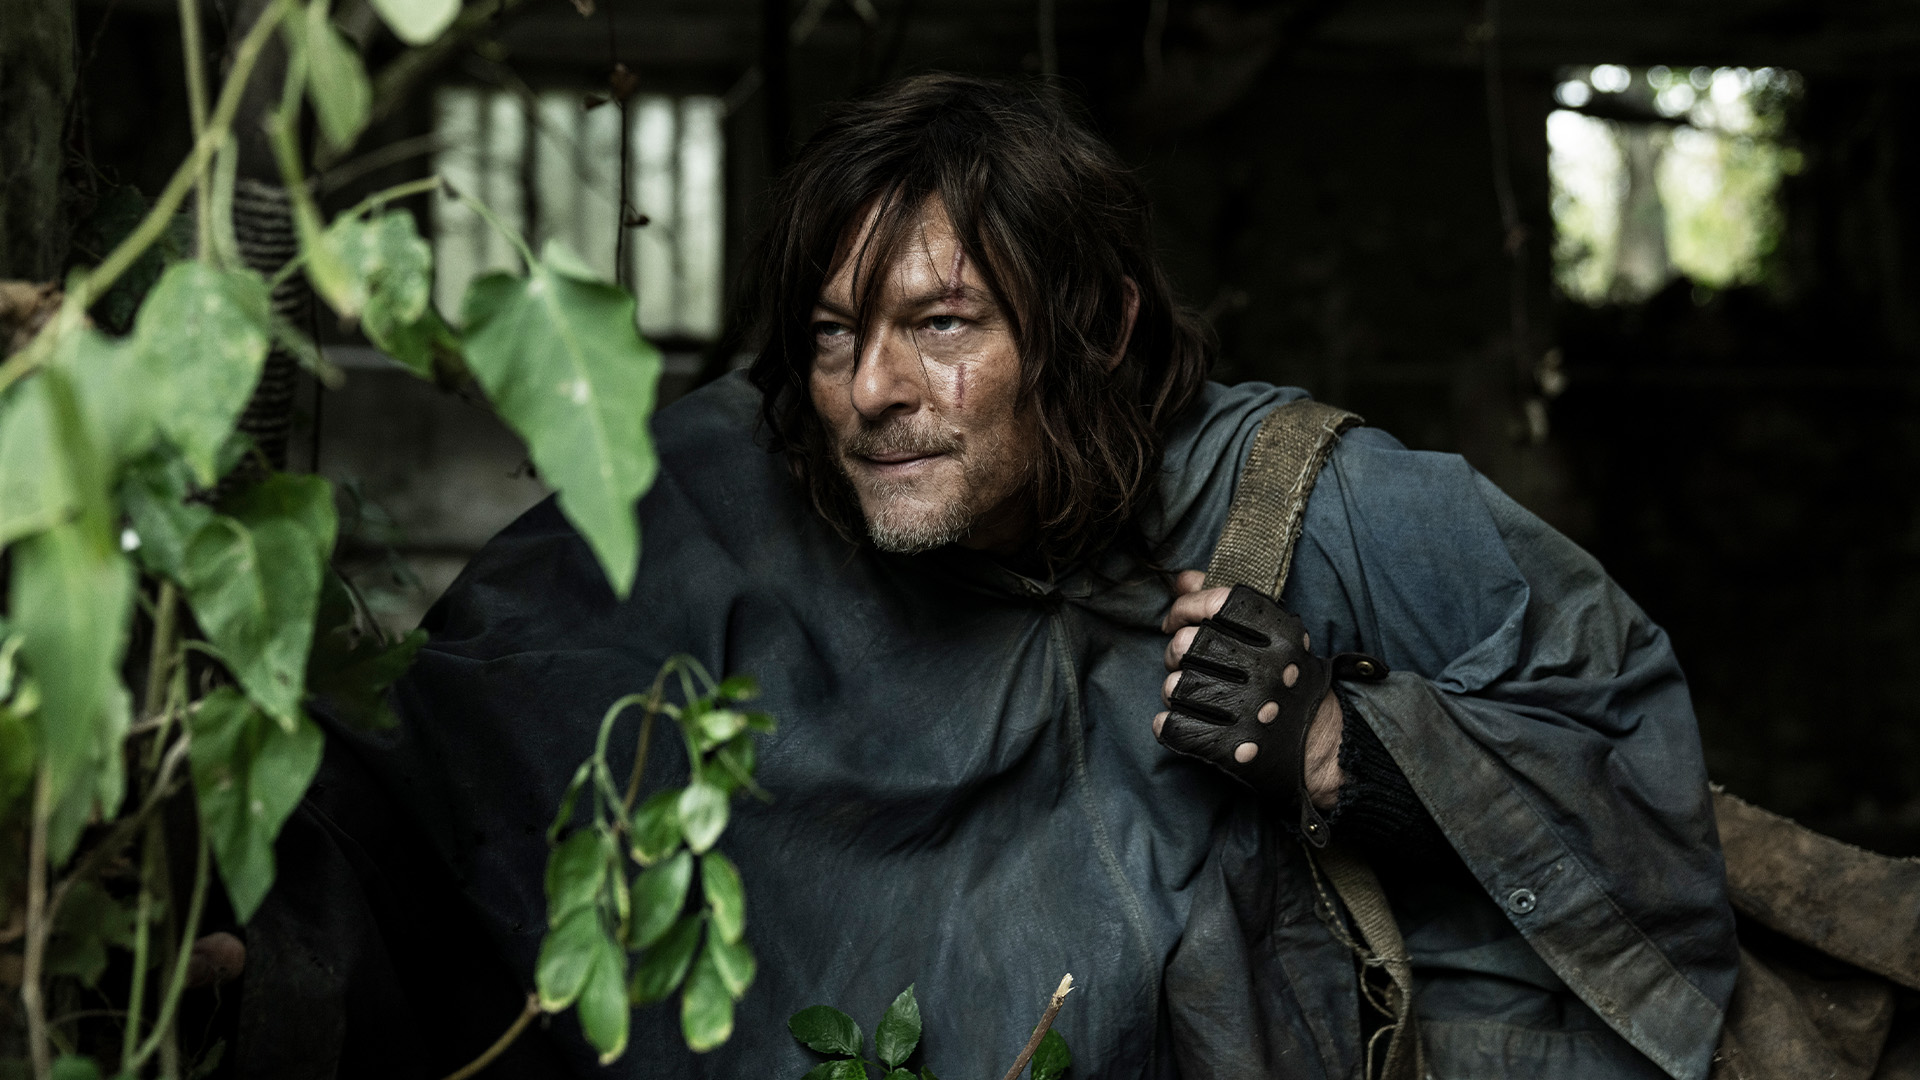 L'âme Perdue, Daryl Dixon's arrival in France puts a young boy in danger., TV-MA, Season 1063351, Episode 1